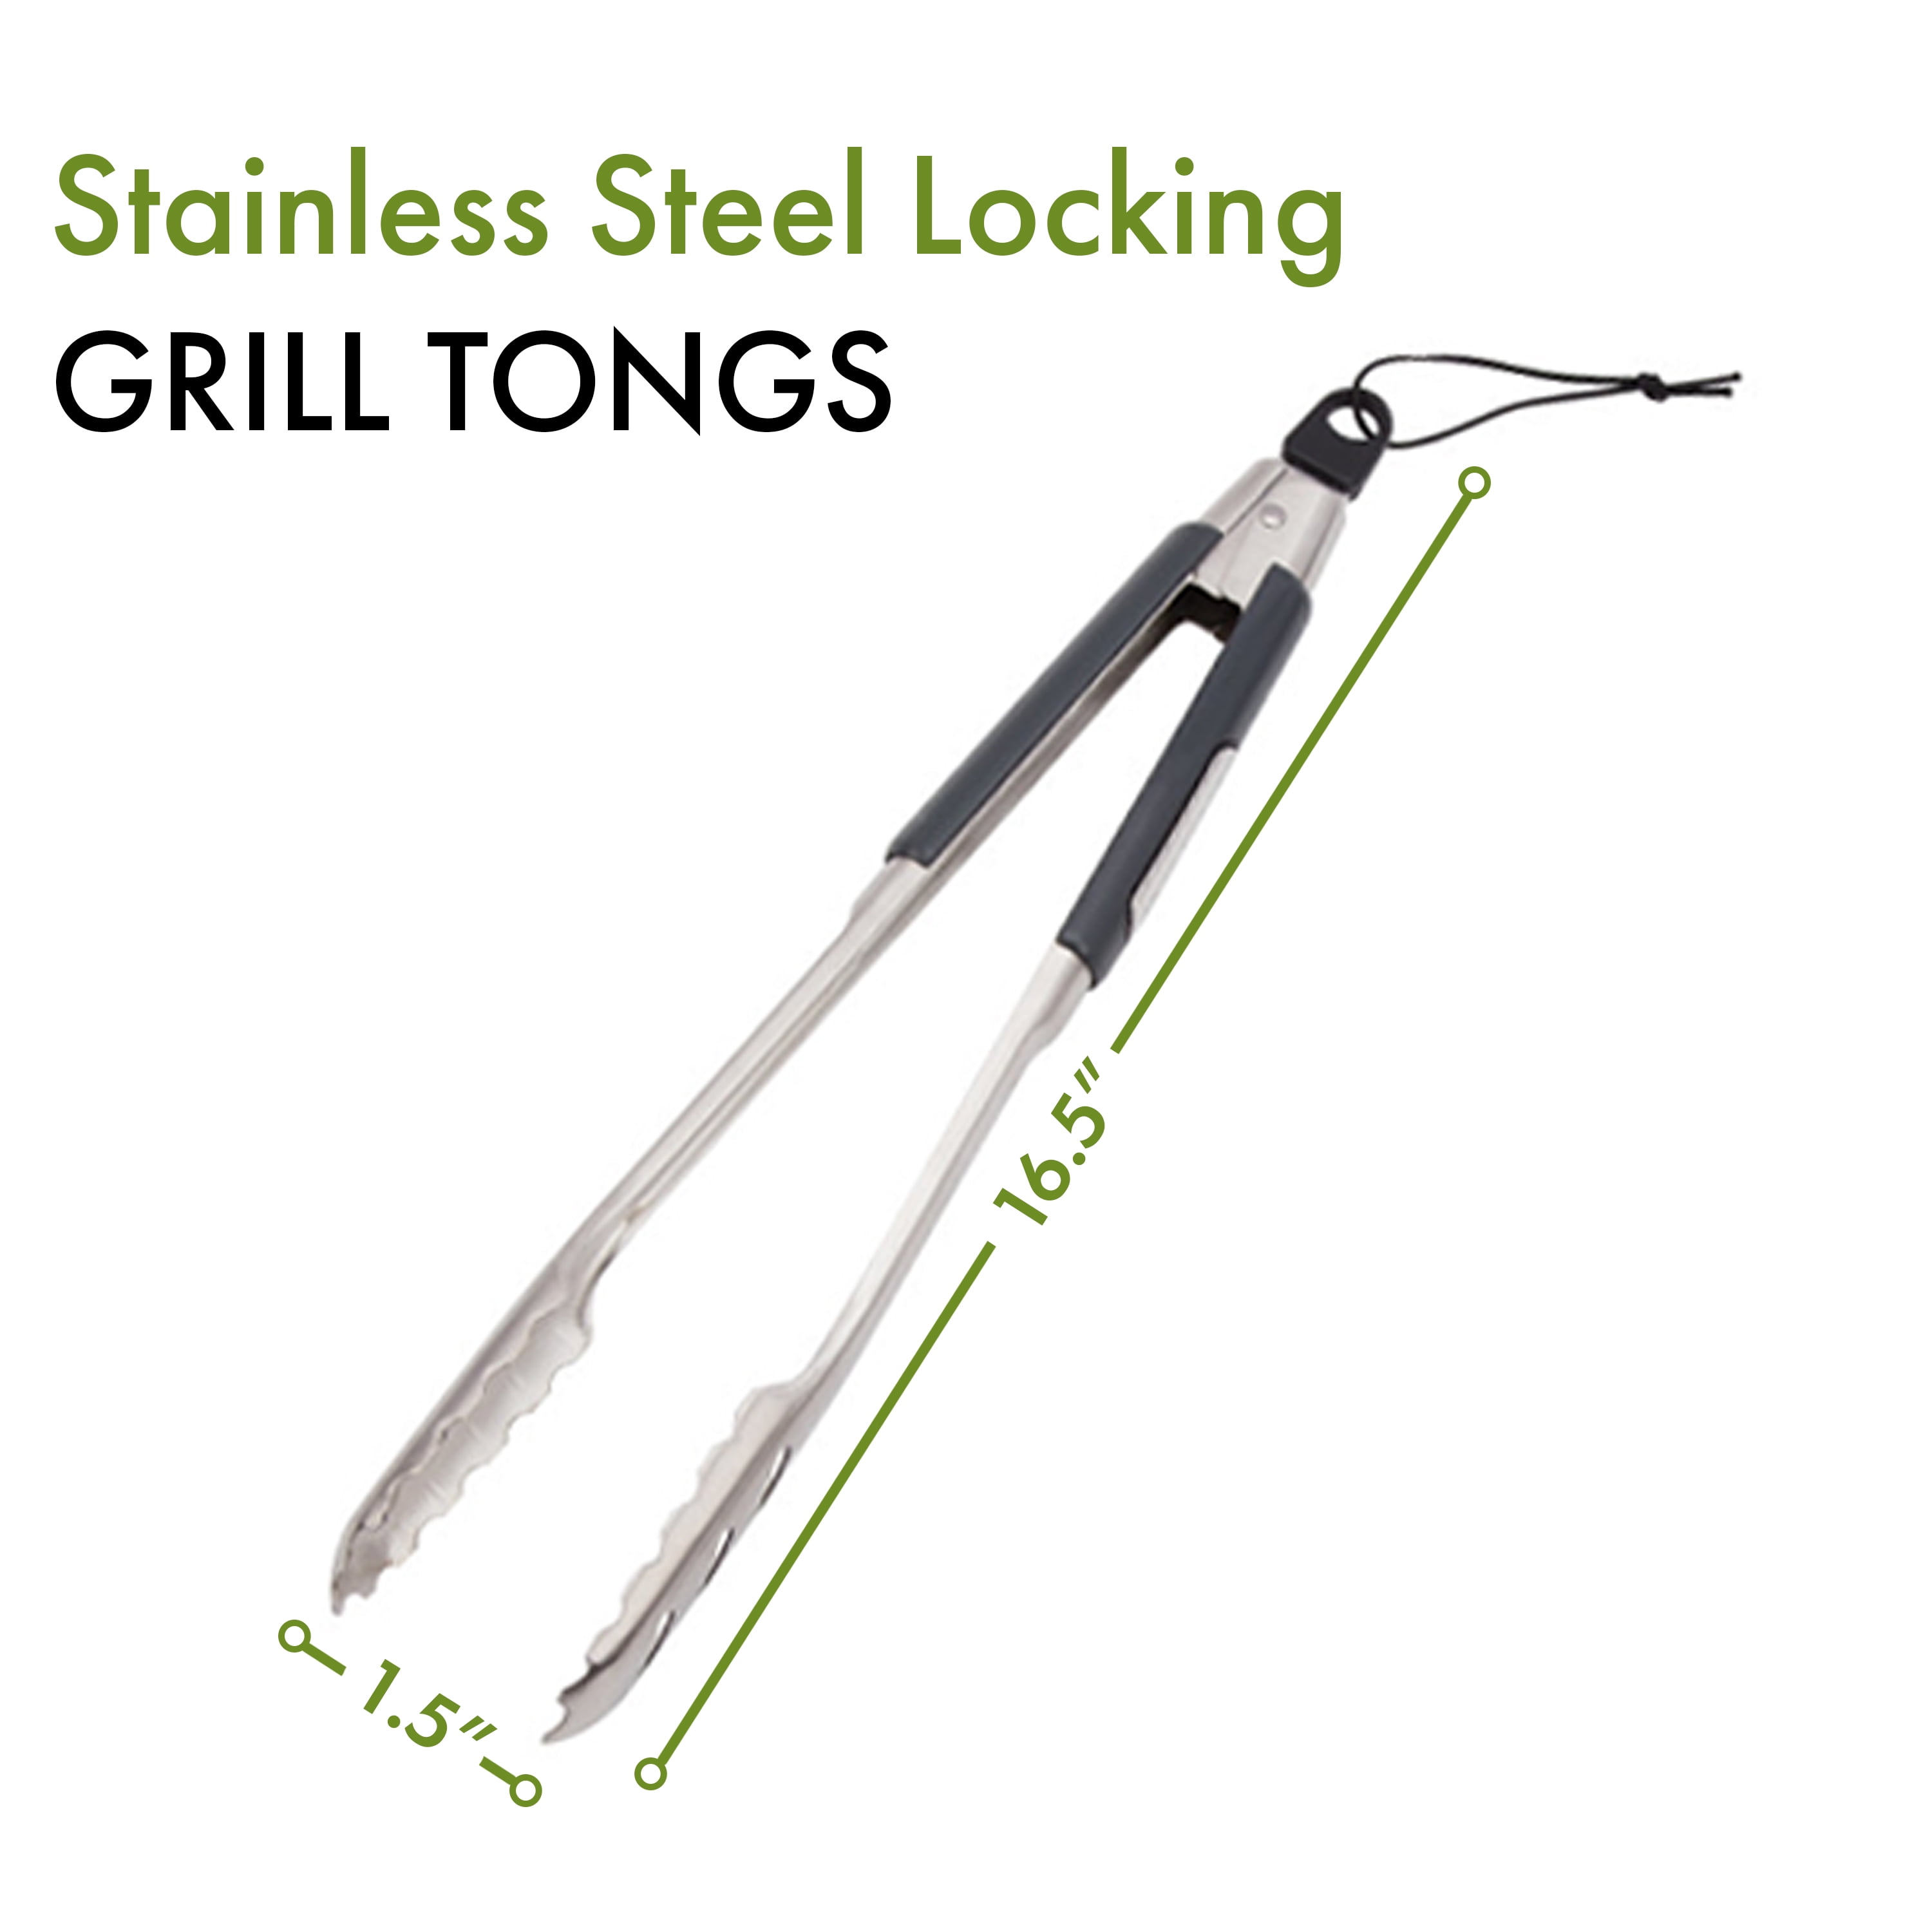 Tongs Fork and Silicone Basting Brush BBQ Grill Tools Set 4 Pieces, Heavy Duty Stainless Steel Barbecue Grill Accessories Including Spatula 11yd Leather Hanging Rope 